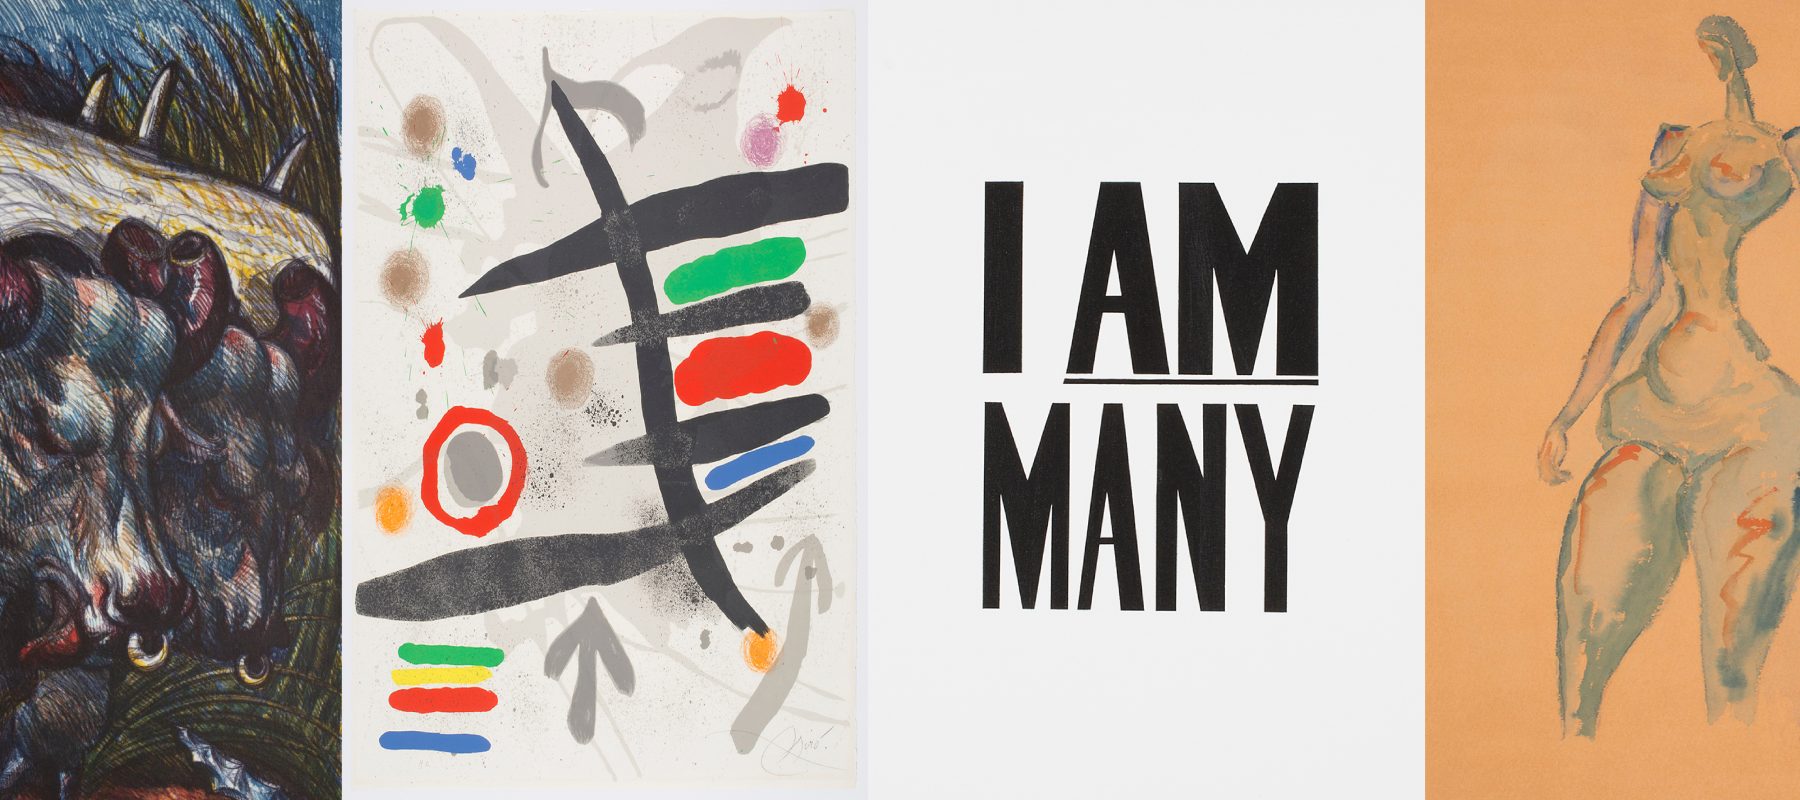 For details from artworks in a row: from left to right, a closeup of oxen from a sculpture, an abstract constructed of black, green, red and blue lines, the words "I AM MANY," and a sketch of a female figure.